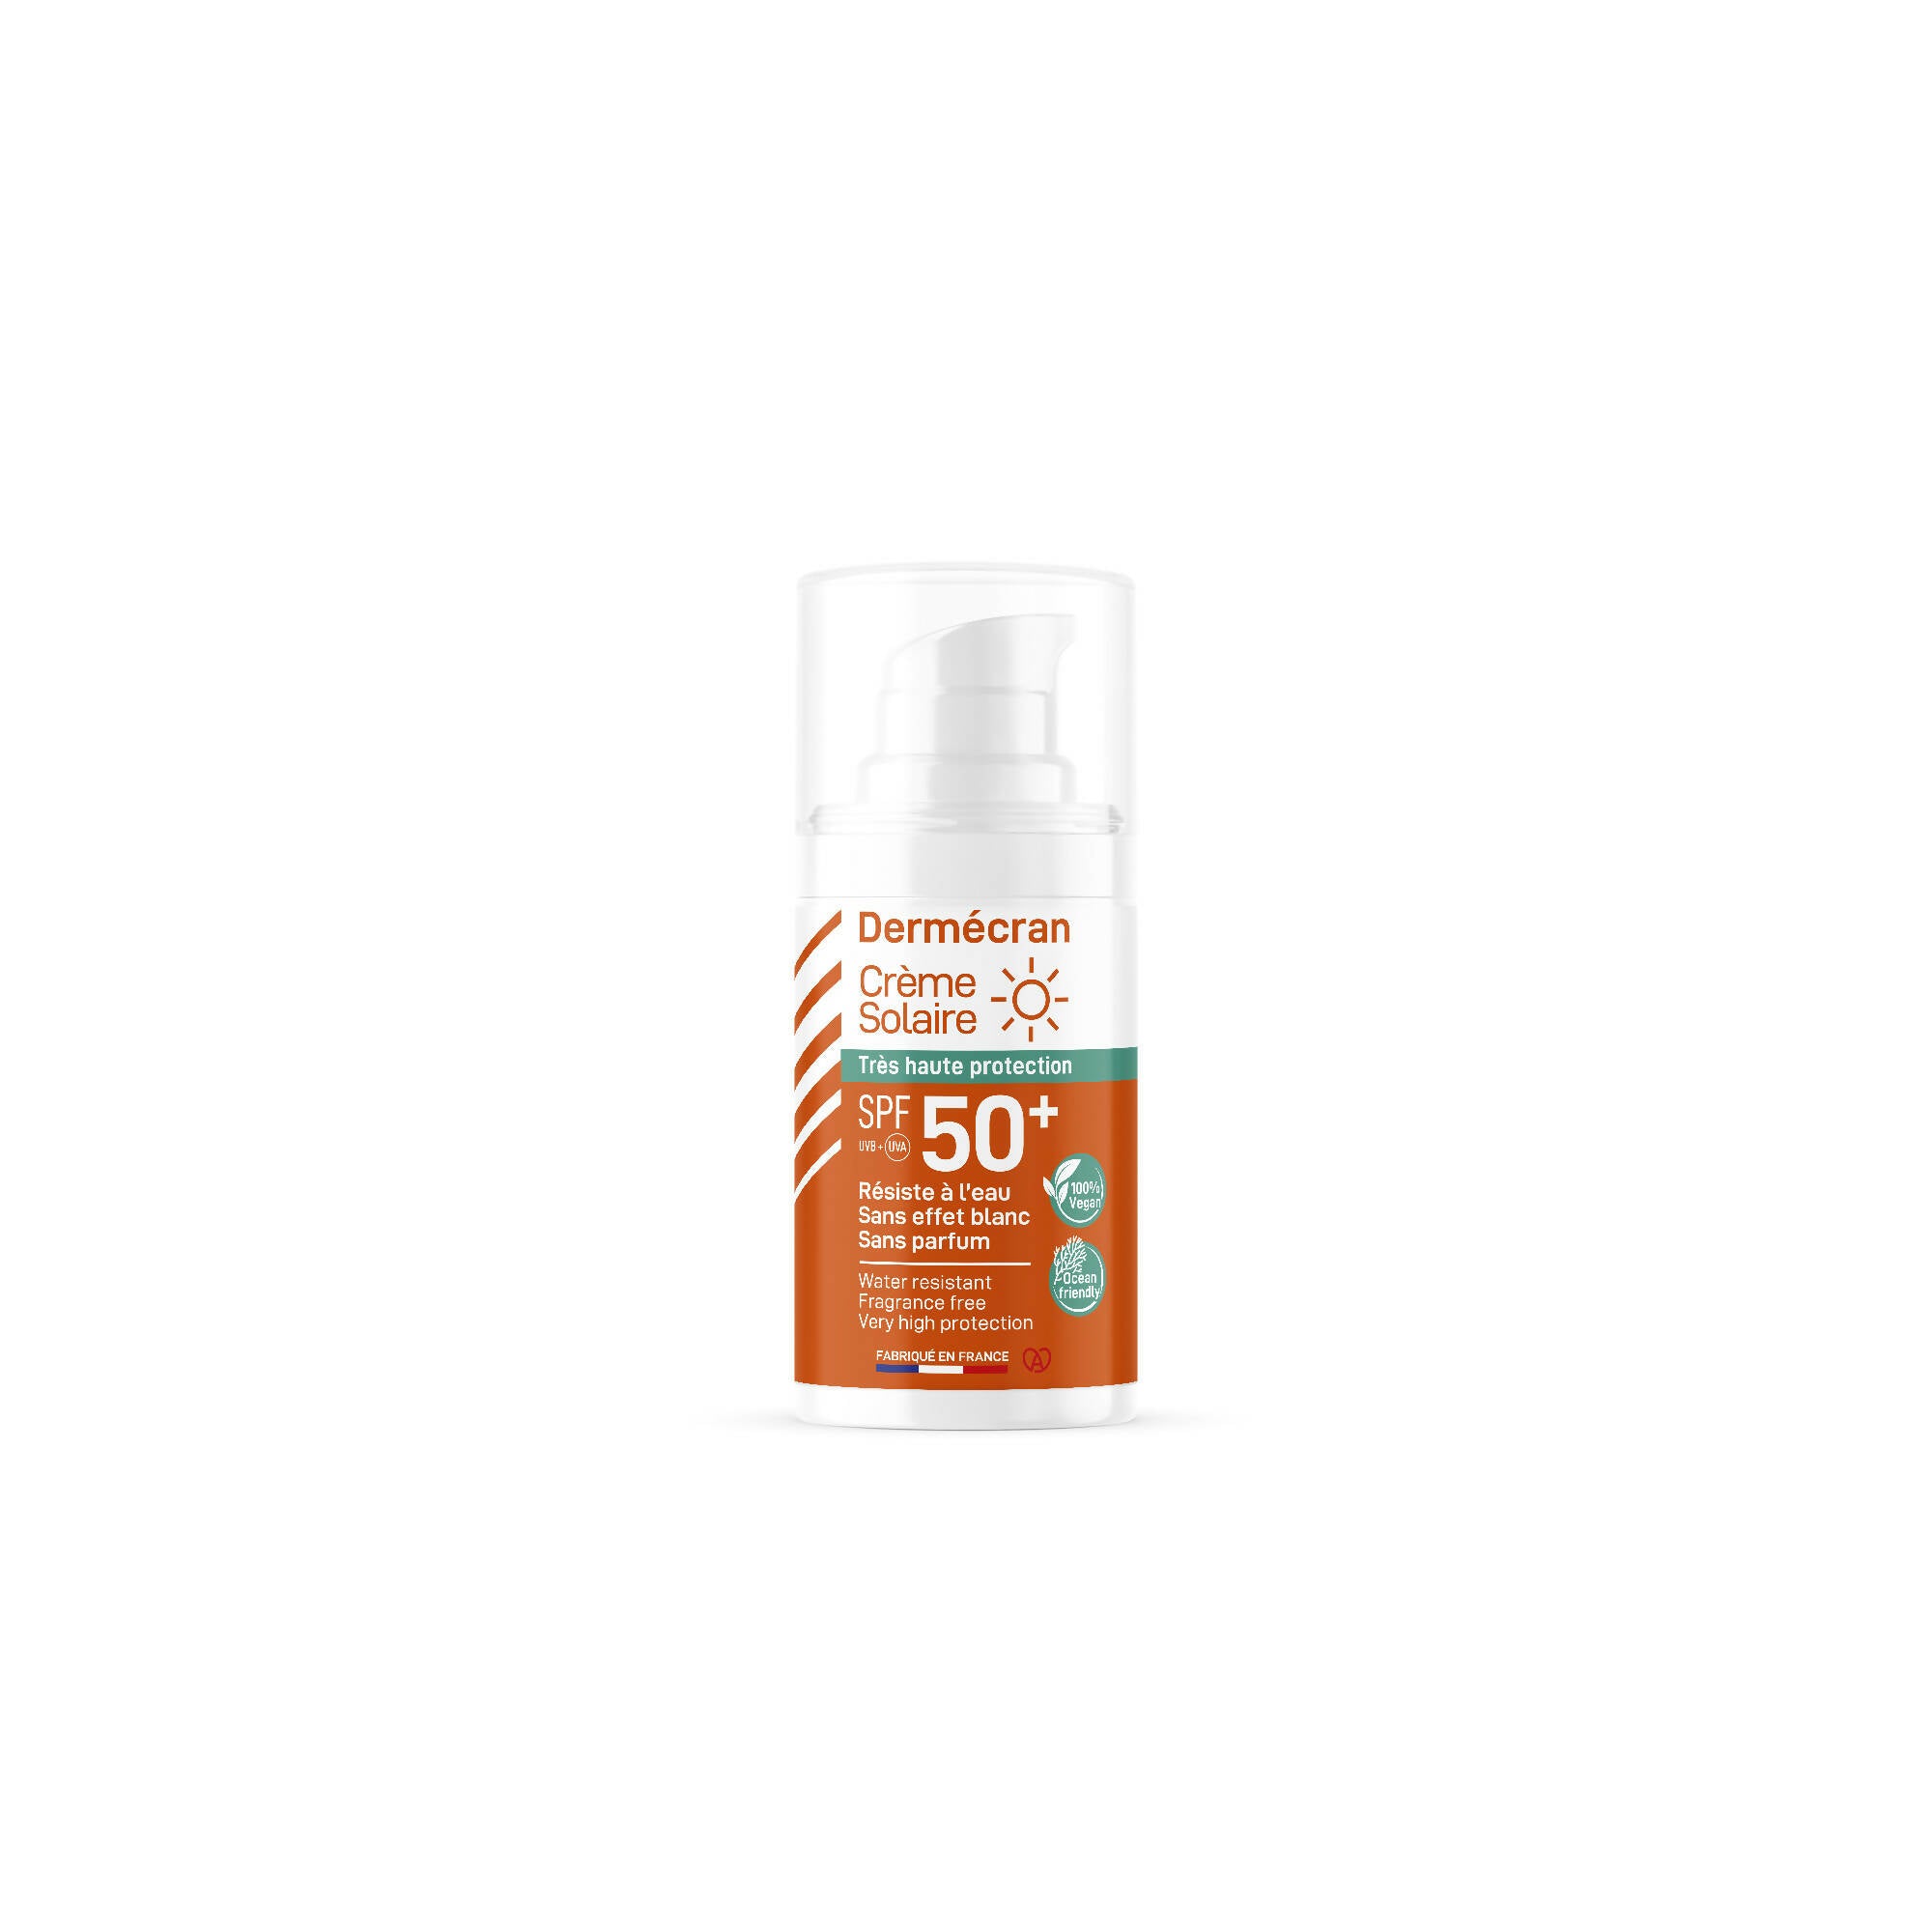 SORIFA - Complete box of 18 - Dermscreen - SPF50+ sun cream - Face and body - Vegan &amp; Ocean Friendly formula - Water resistant - For the whole family from 3 years old - Made in France - Pocket format 15 ml - 0